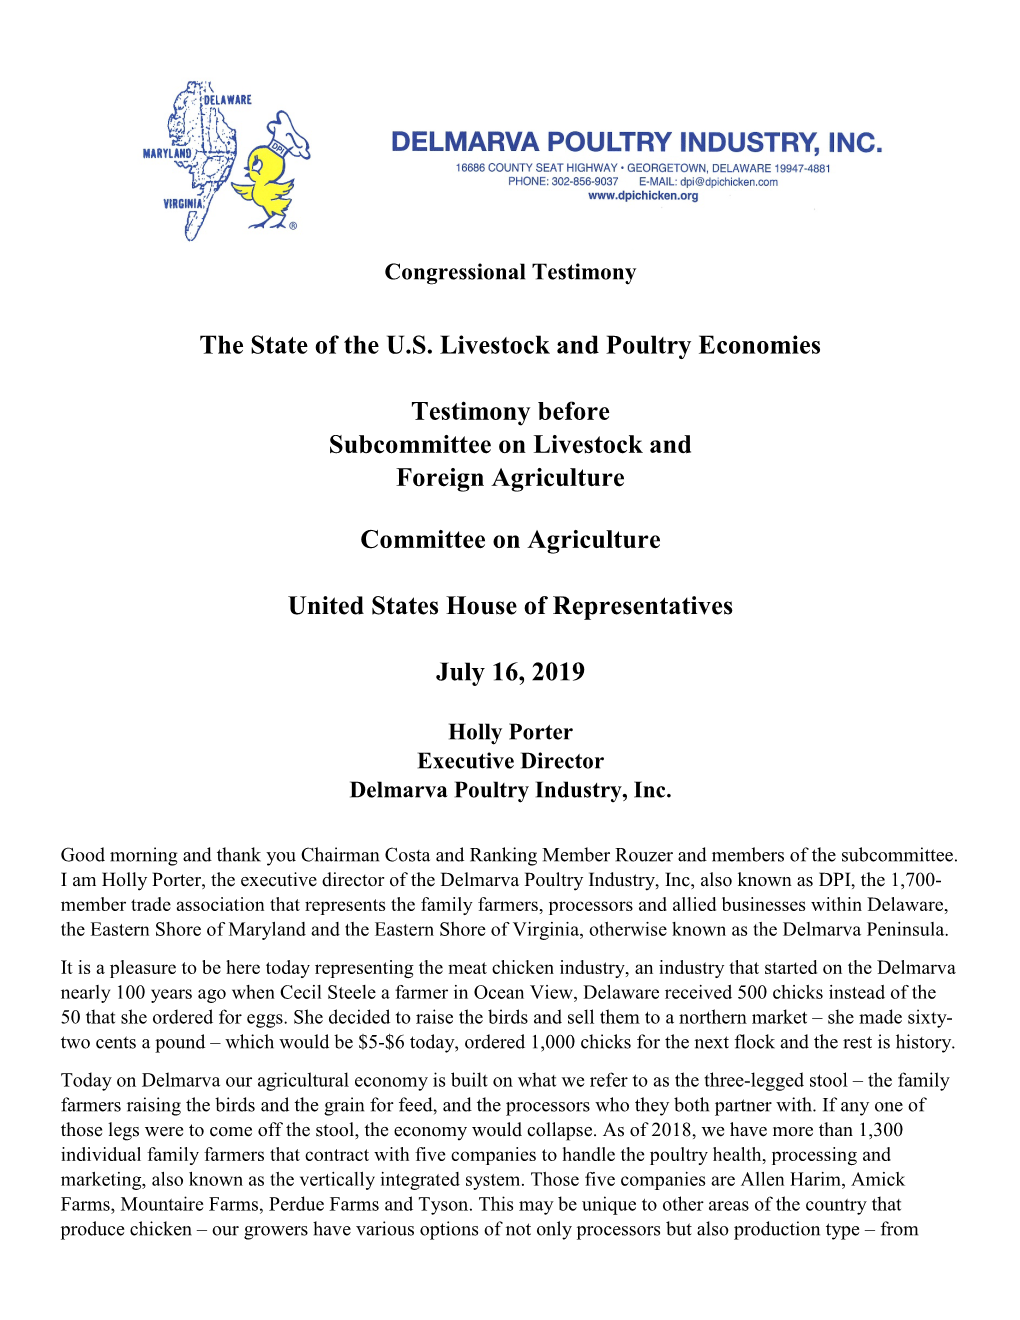 The State of the US Livestock and Poultry Economies